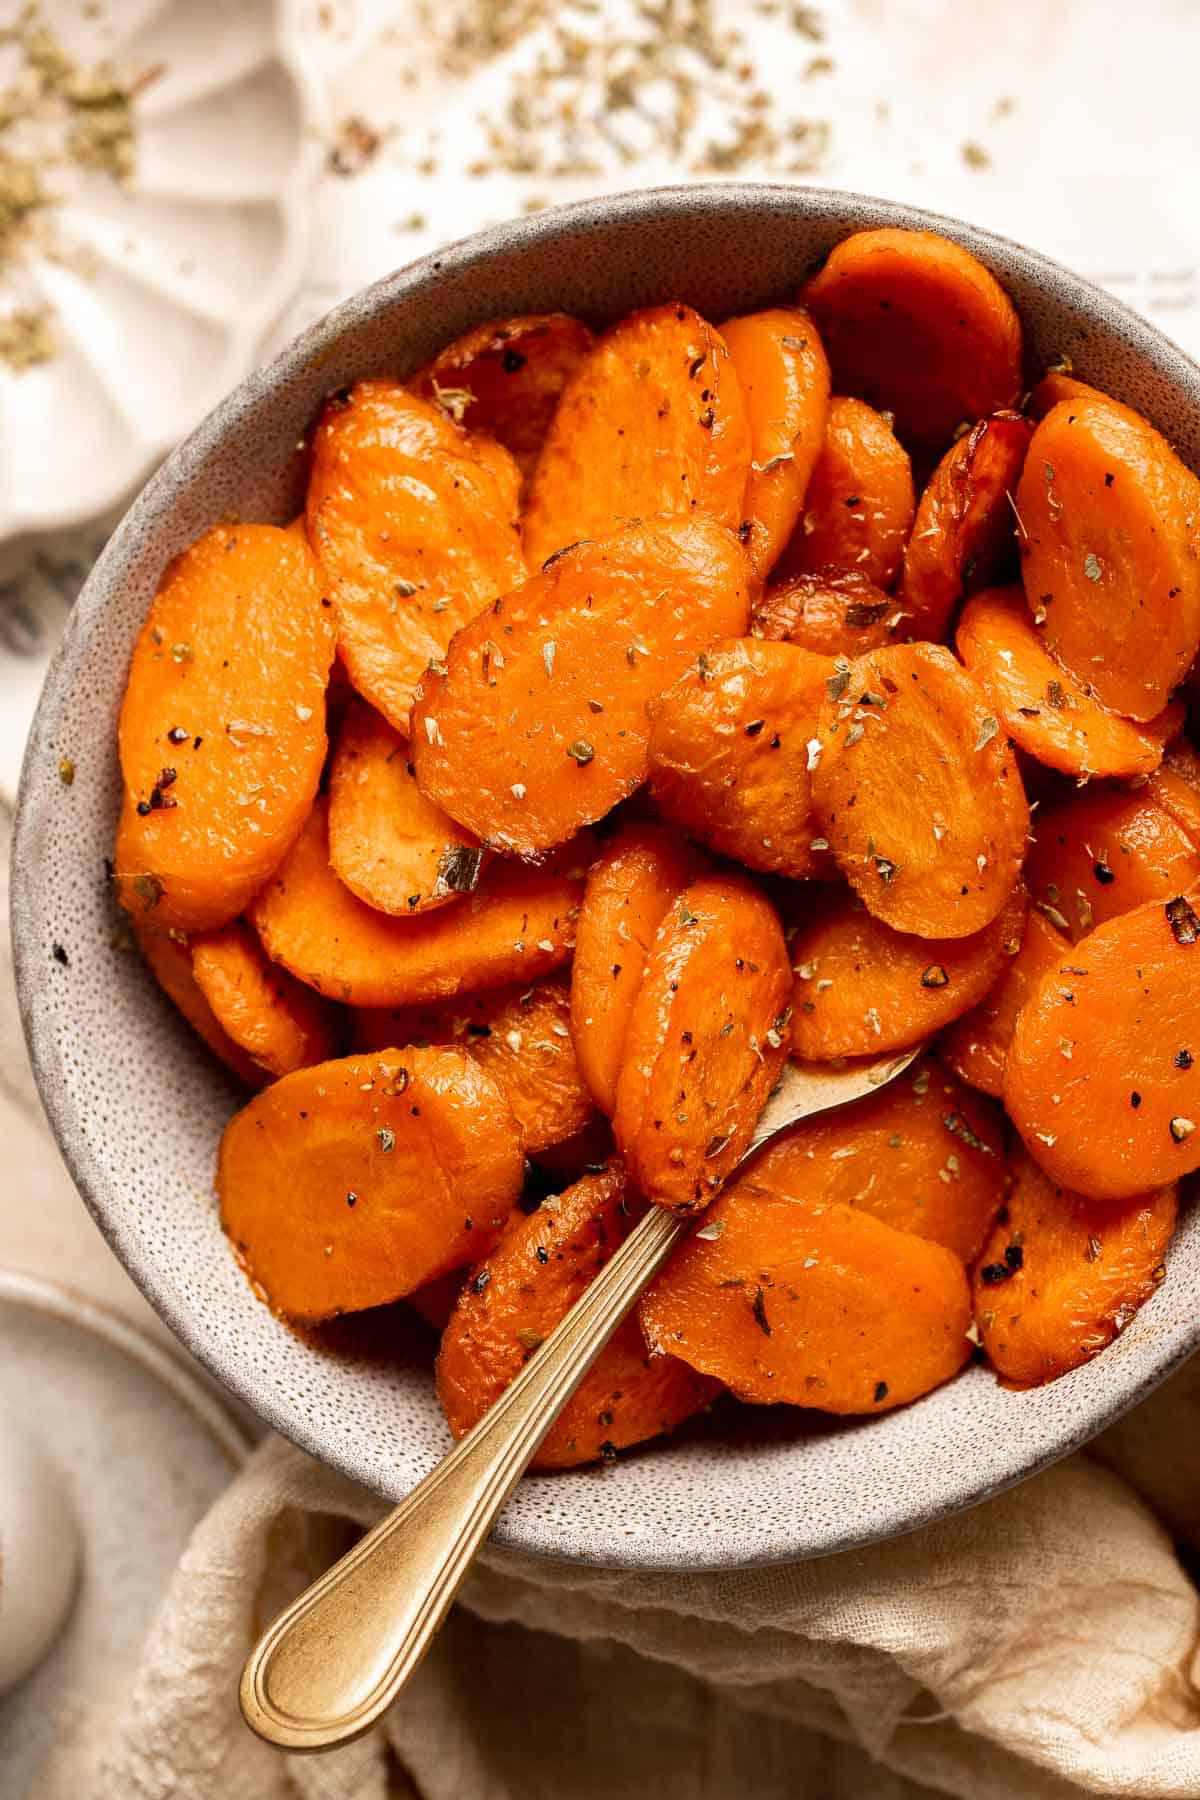 Roasted Carrots are a healthy, delicious, and easy to make side dish with a slightly crispy interior and sweet and tender inside. Serve with any entree! | aheadofthyme.com